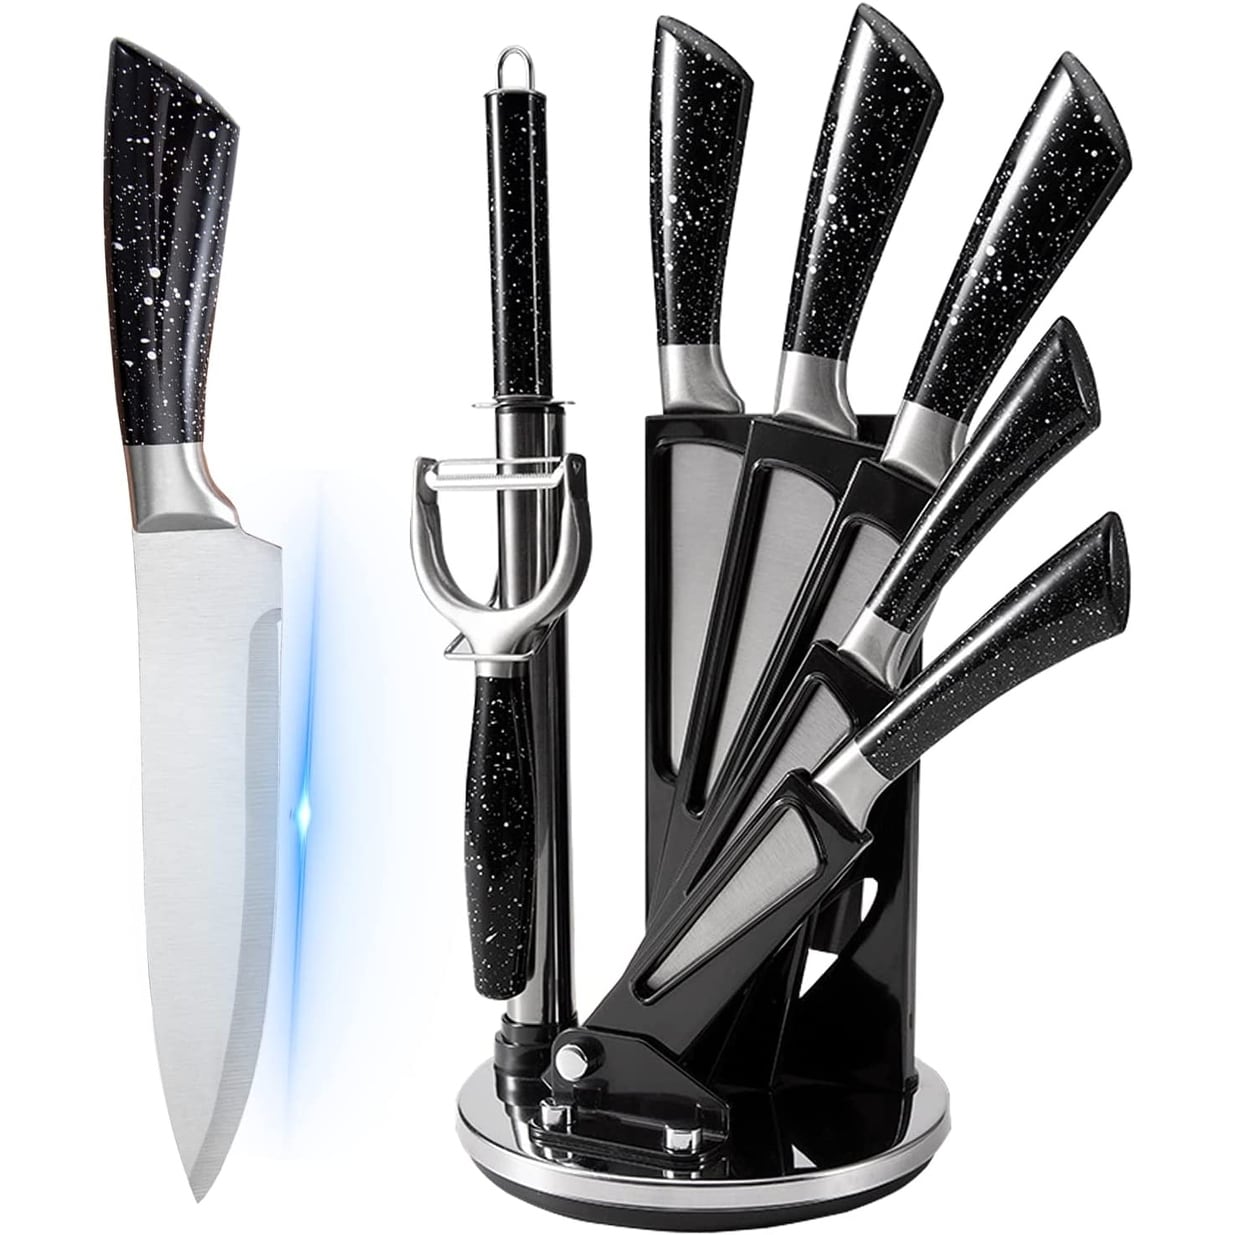 https://ak1.ostkcdn.com/images/products/is/images/direct/371493626ee29c416fa697a50d9d002cfc553e2e/Kitchen-Knife-Set%2C-8-Pieces-Non-stick-Stainless-Steel-Chef-Knives-Set-with-Acrylic-Stand-%28Black%29.jpg